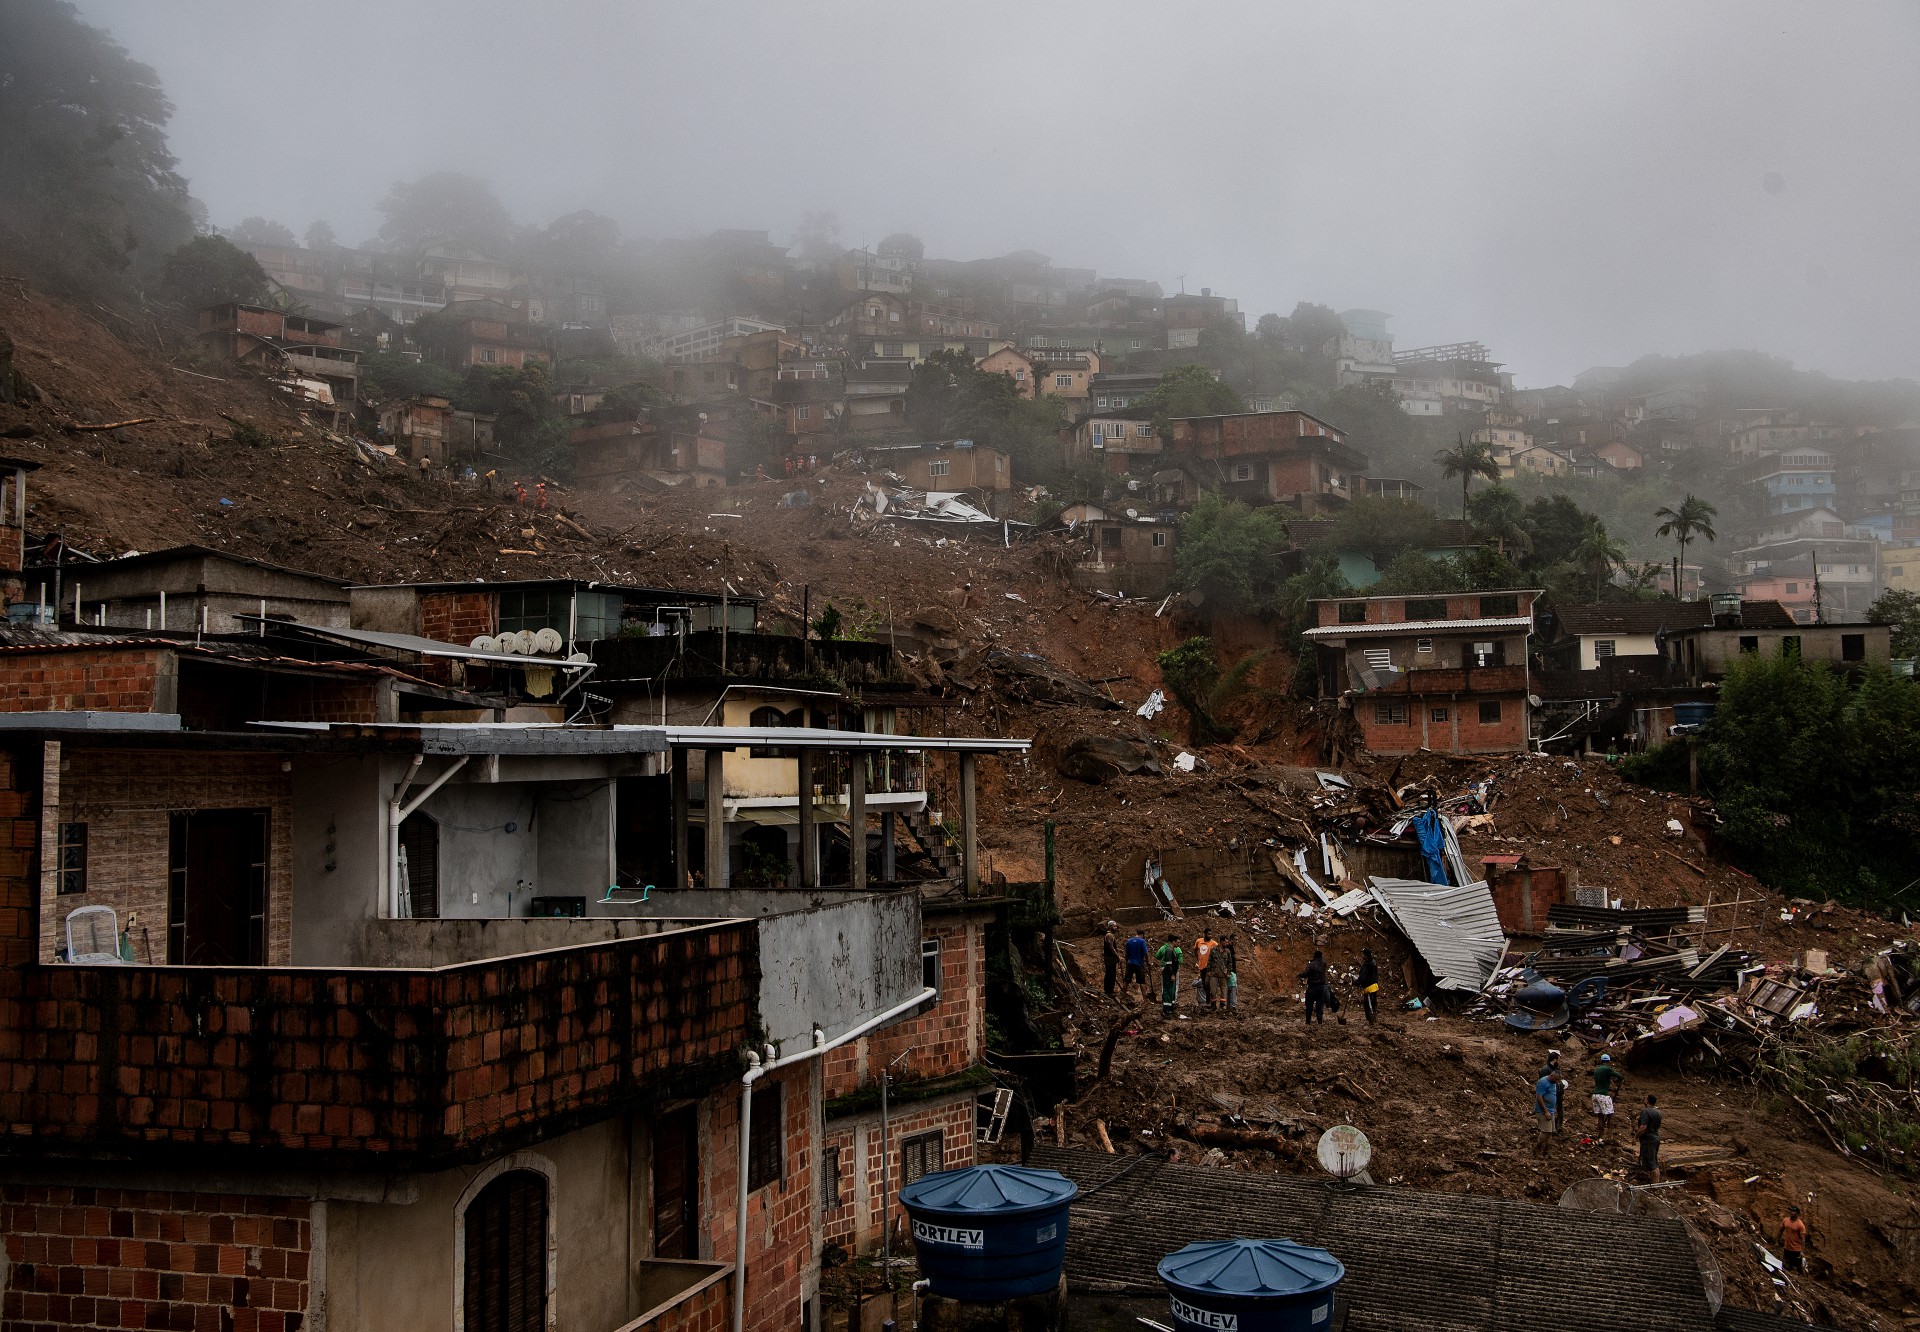 Tragédia em Petrópols. View of the scene after a mudslide in Petropolis, Brazil on February 16, 2022. - Large scale flooding destroyed hundreds of properties and claimed at least 34 lives in the area. (Photo by CARL DE SOUZA / AFP). (Foto: CARL DE SOUZA/AFP)